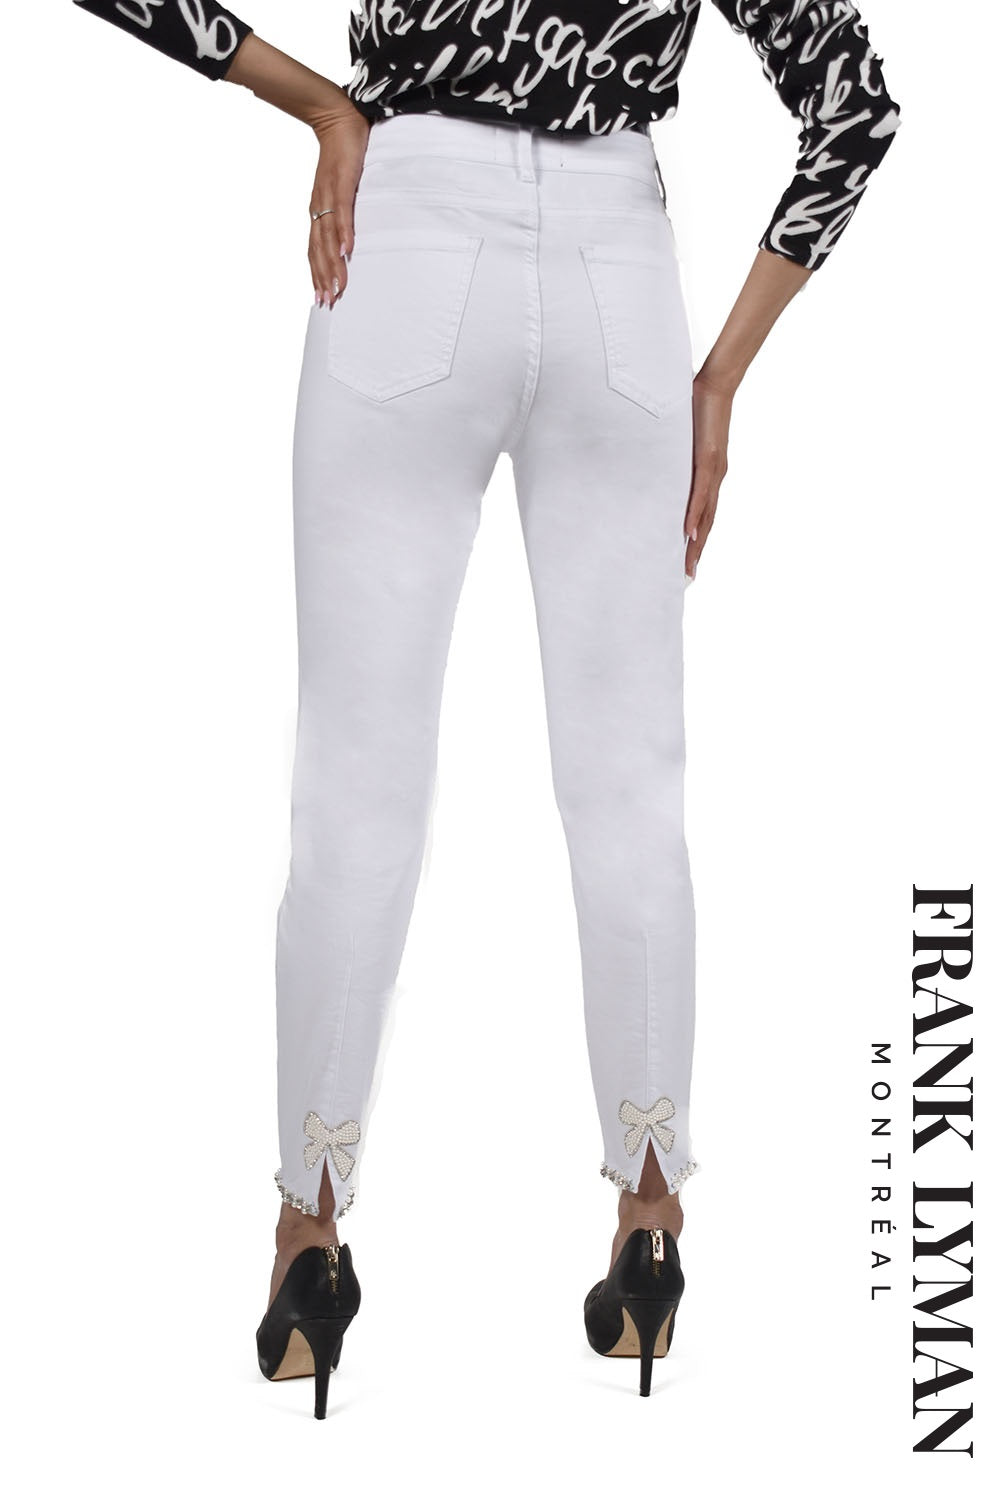 Frank Lyman Montreal White Pearl Bow Jeans